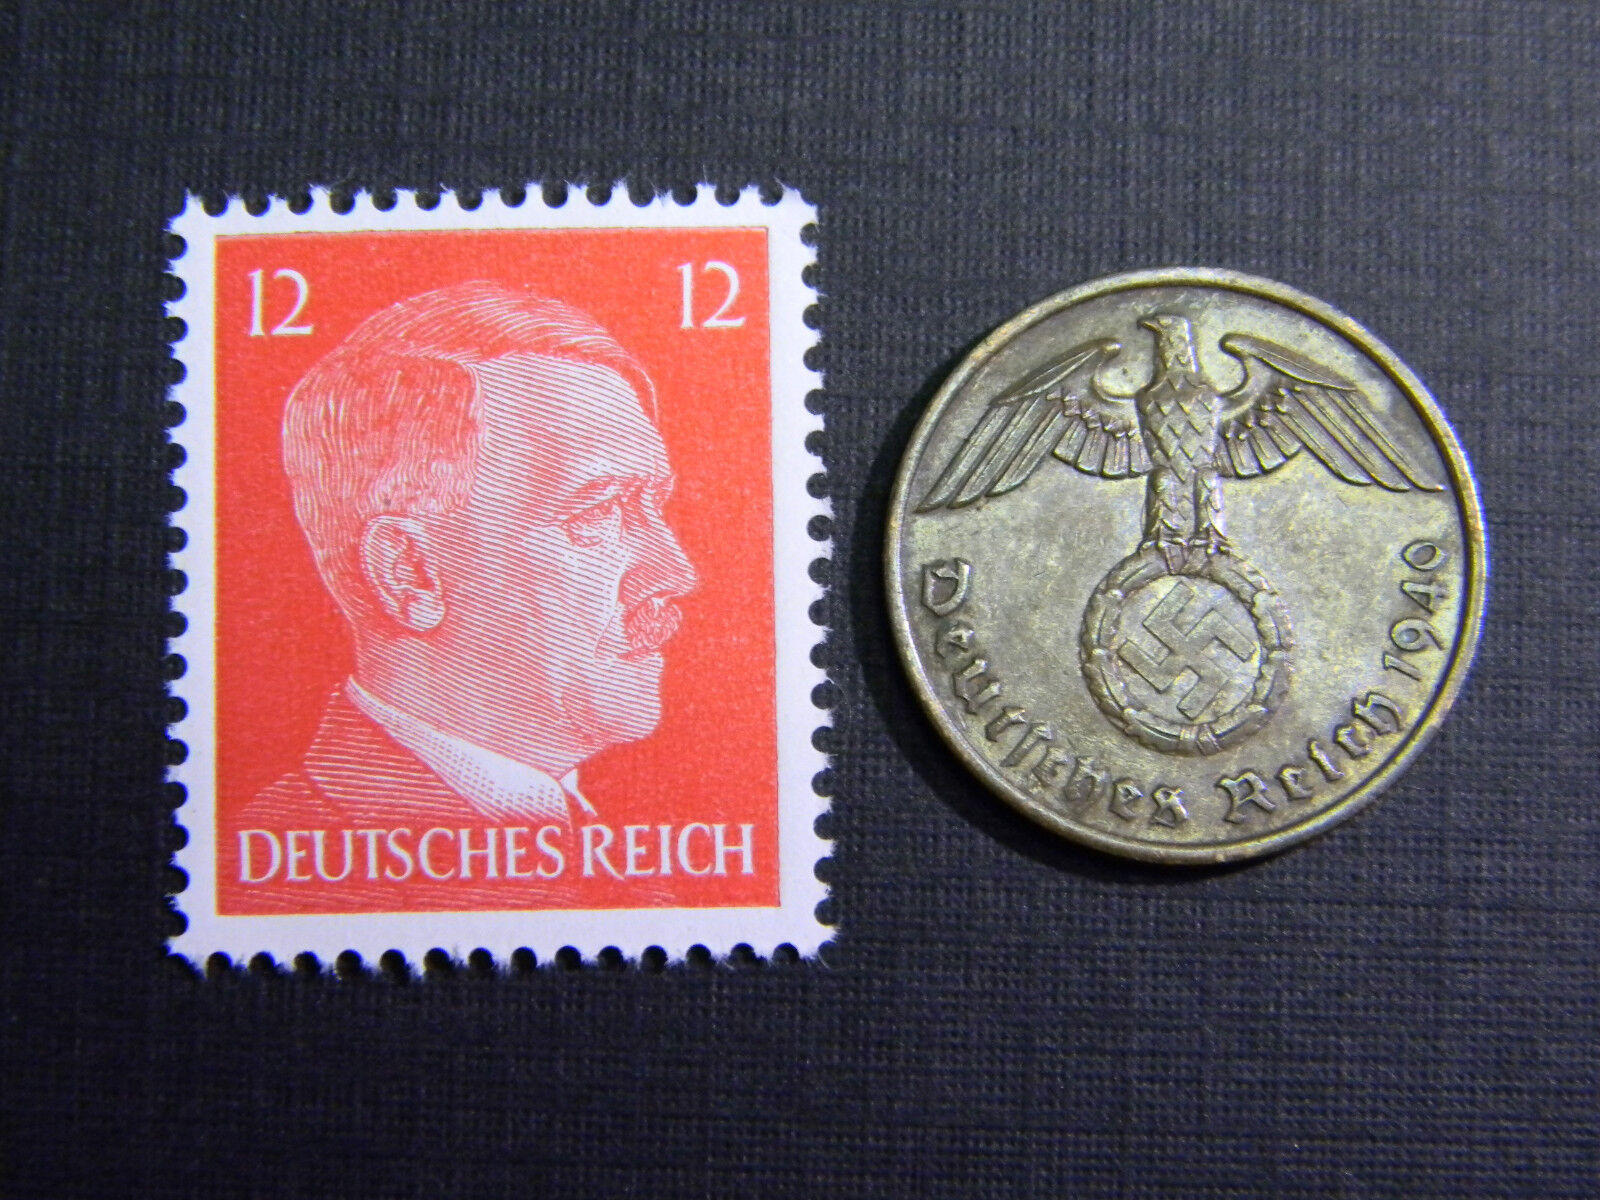 Authentic German Stamp WORLD WAR 2 and Antique German 2 pf Coin